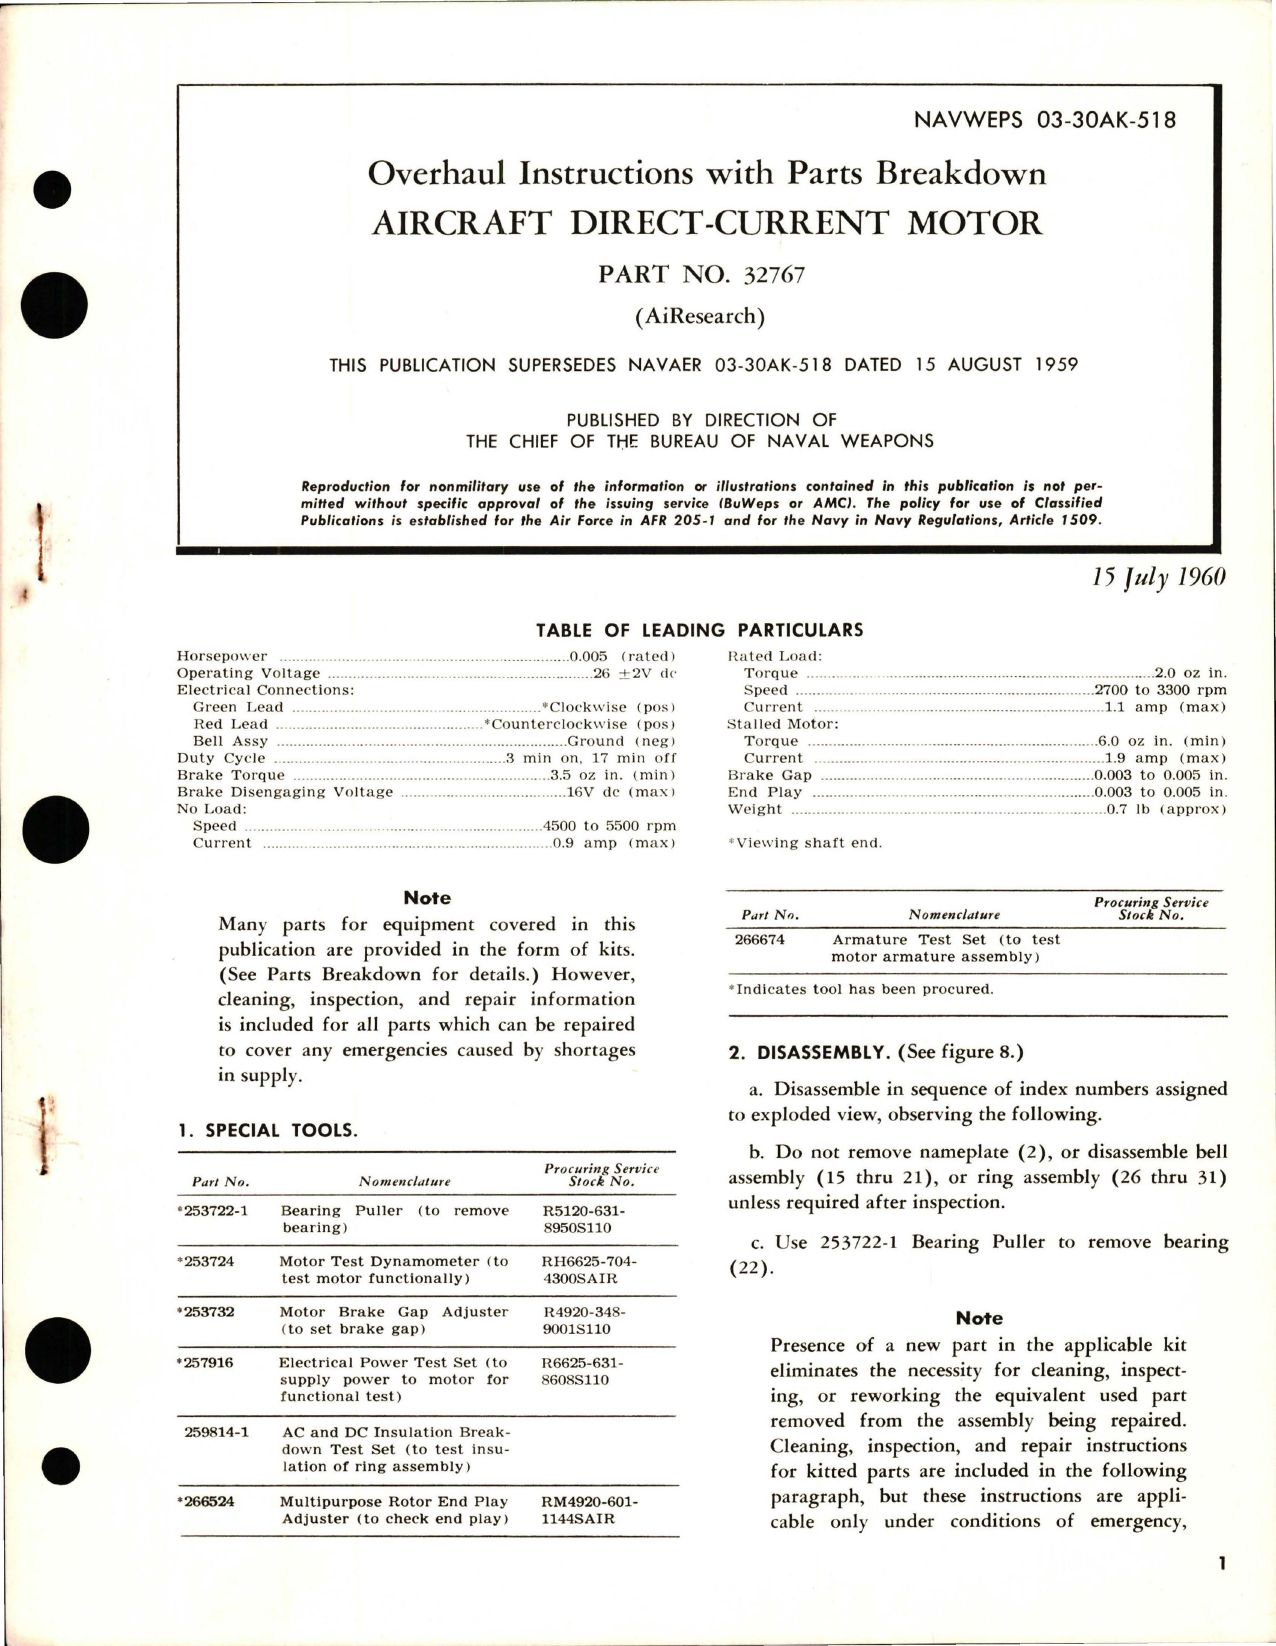 Sample page 1 from AirCorps Library document: Overhaul Instructions with Parts Breakdown for Direct-Current Motor - Part 32767